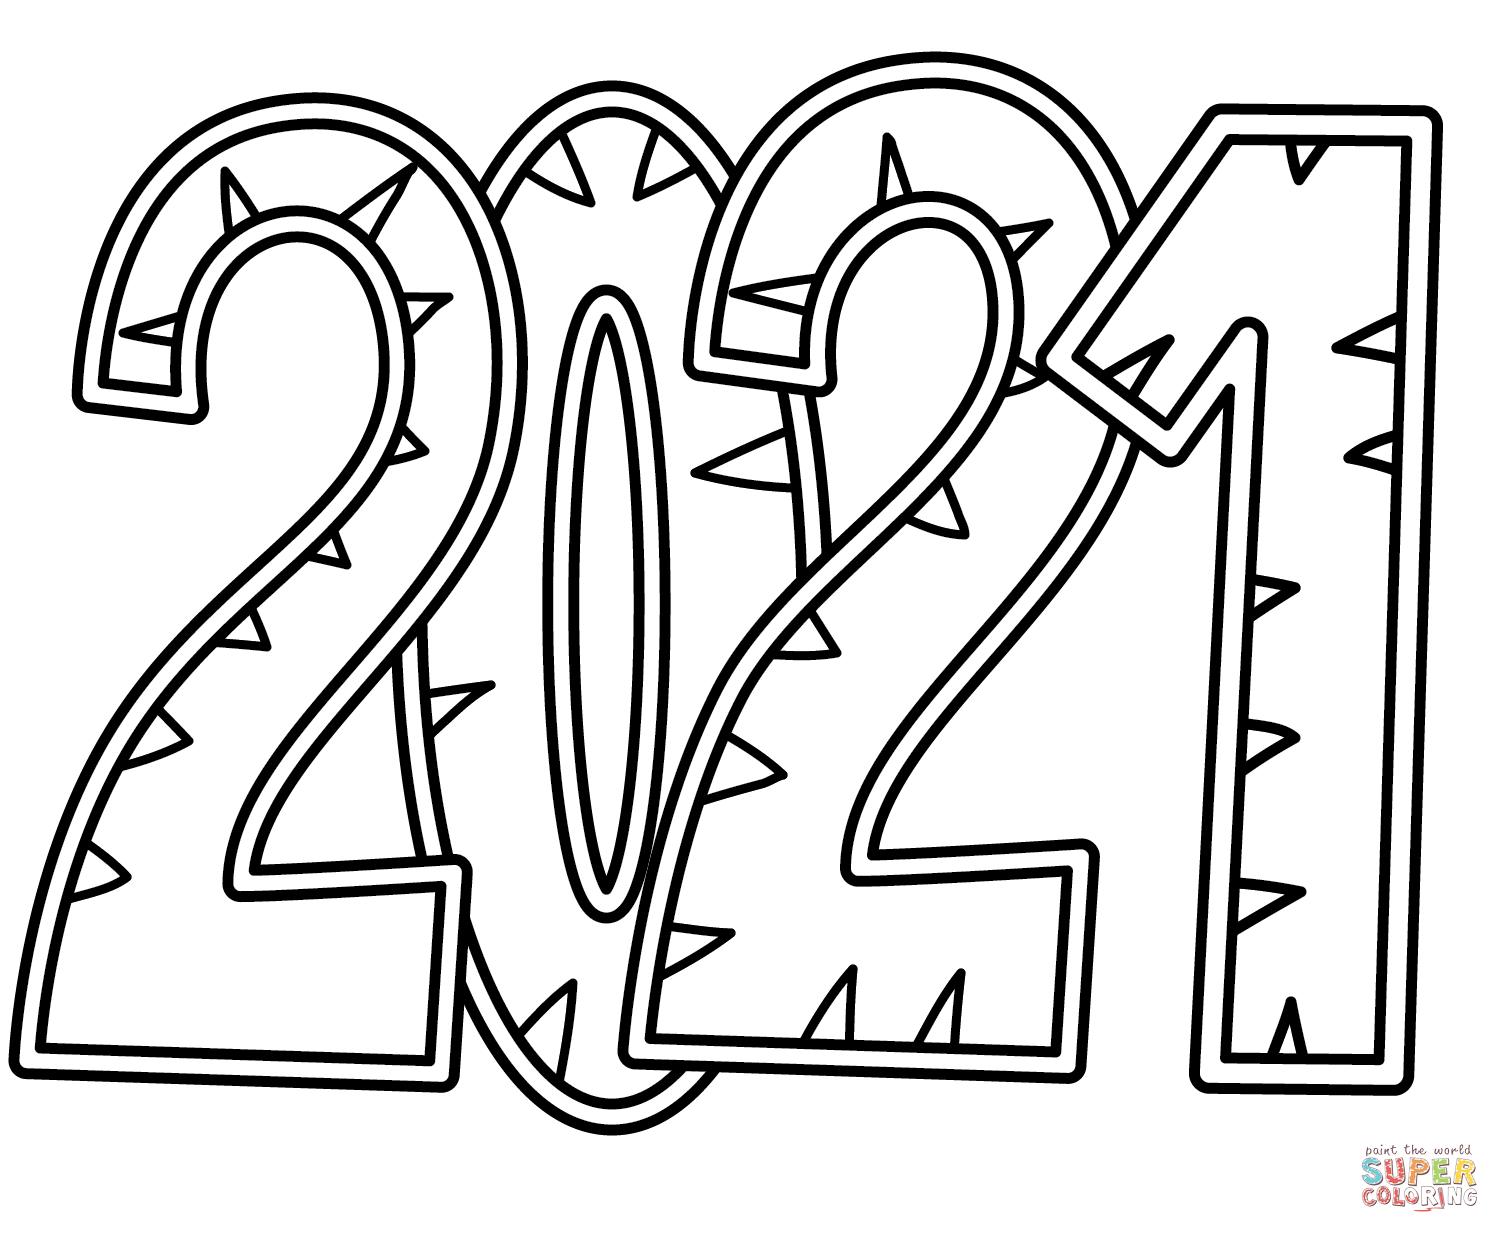 2021 Doodle coloring page | Free Printable Coloring Pages